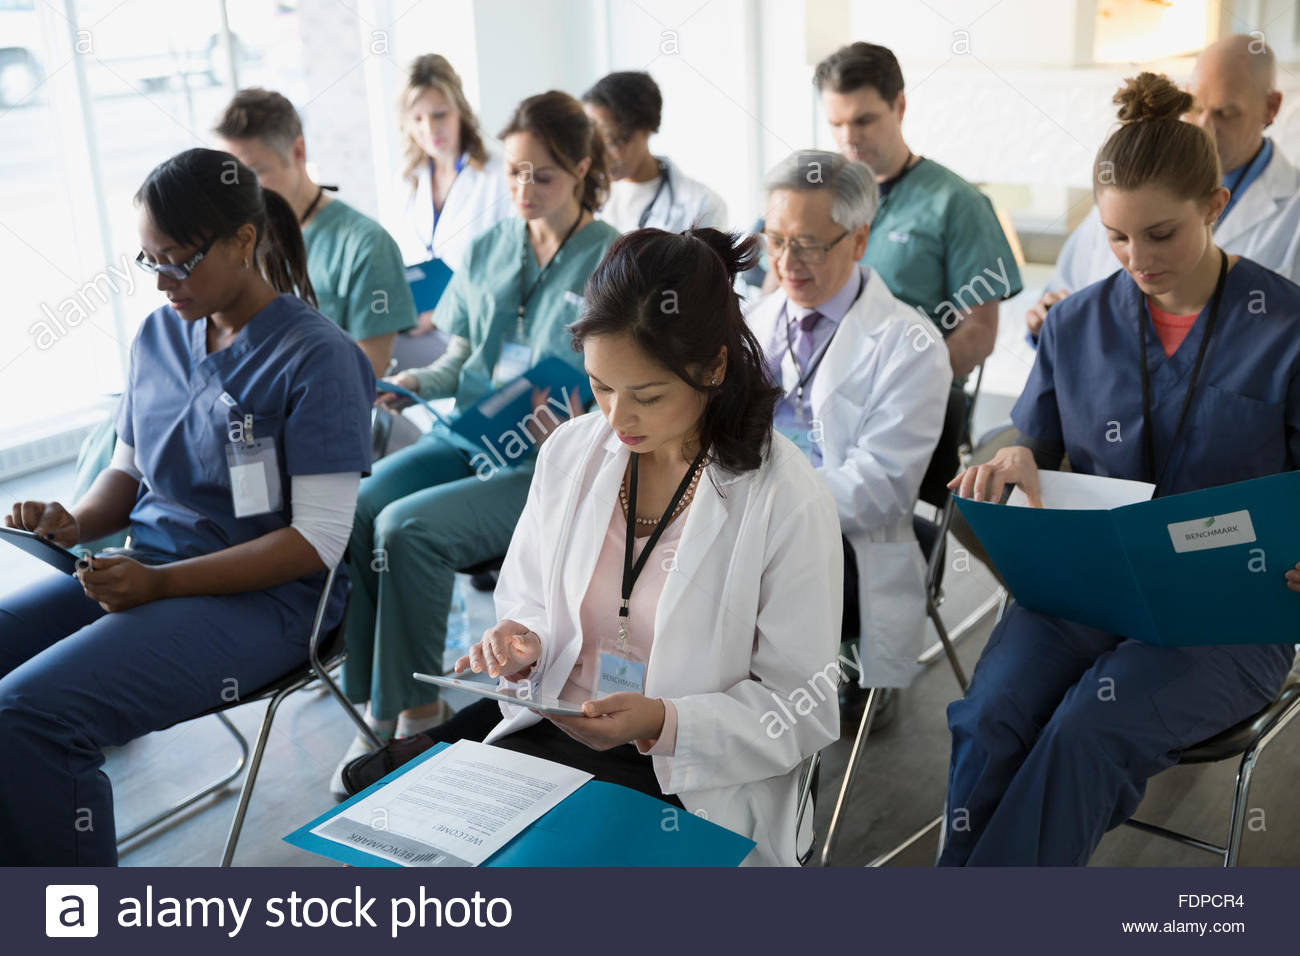 Doctors and nurses in seminar audience Stock Photo